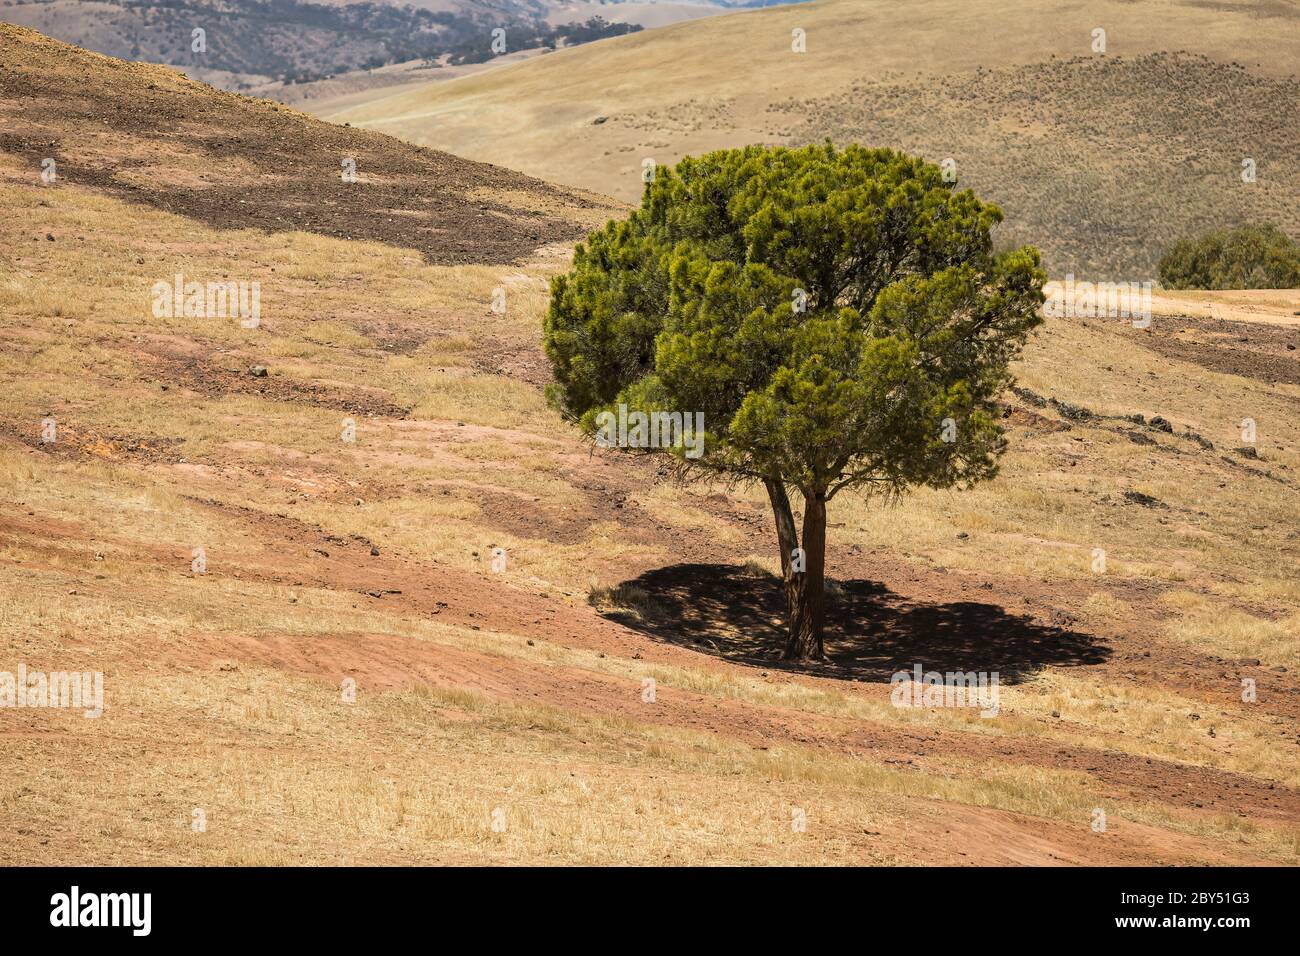 A solitary green tree in a dry drought affected area of South Australia Stock Photo